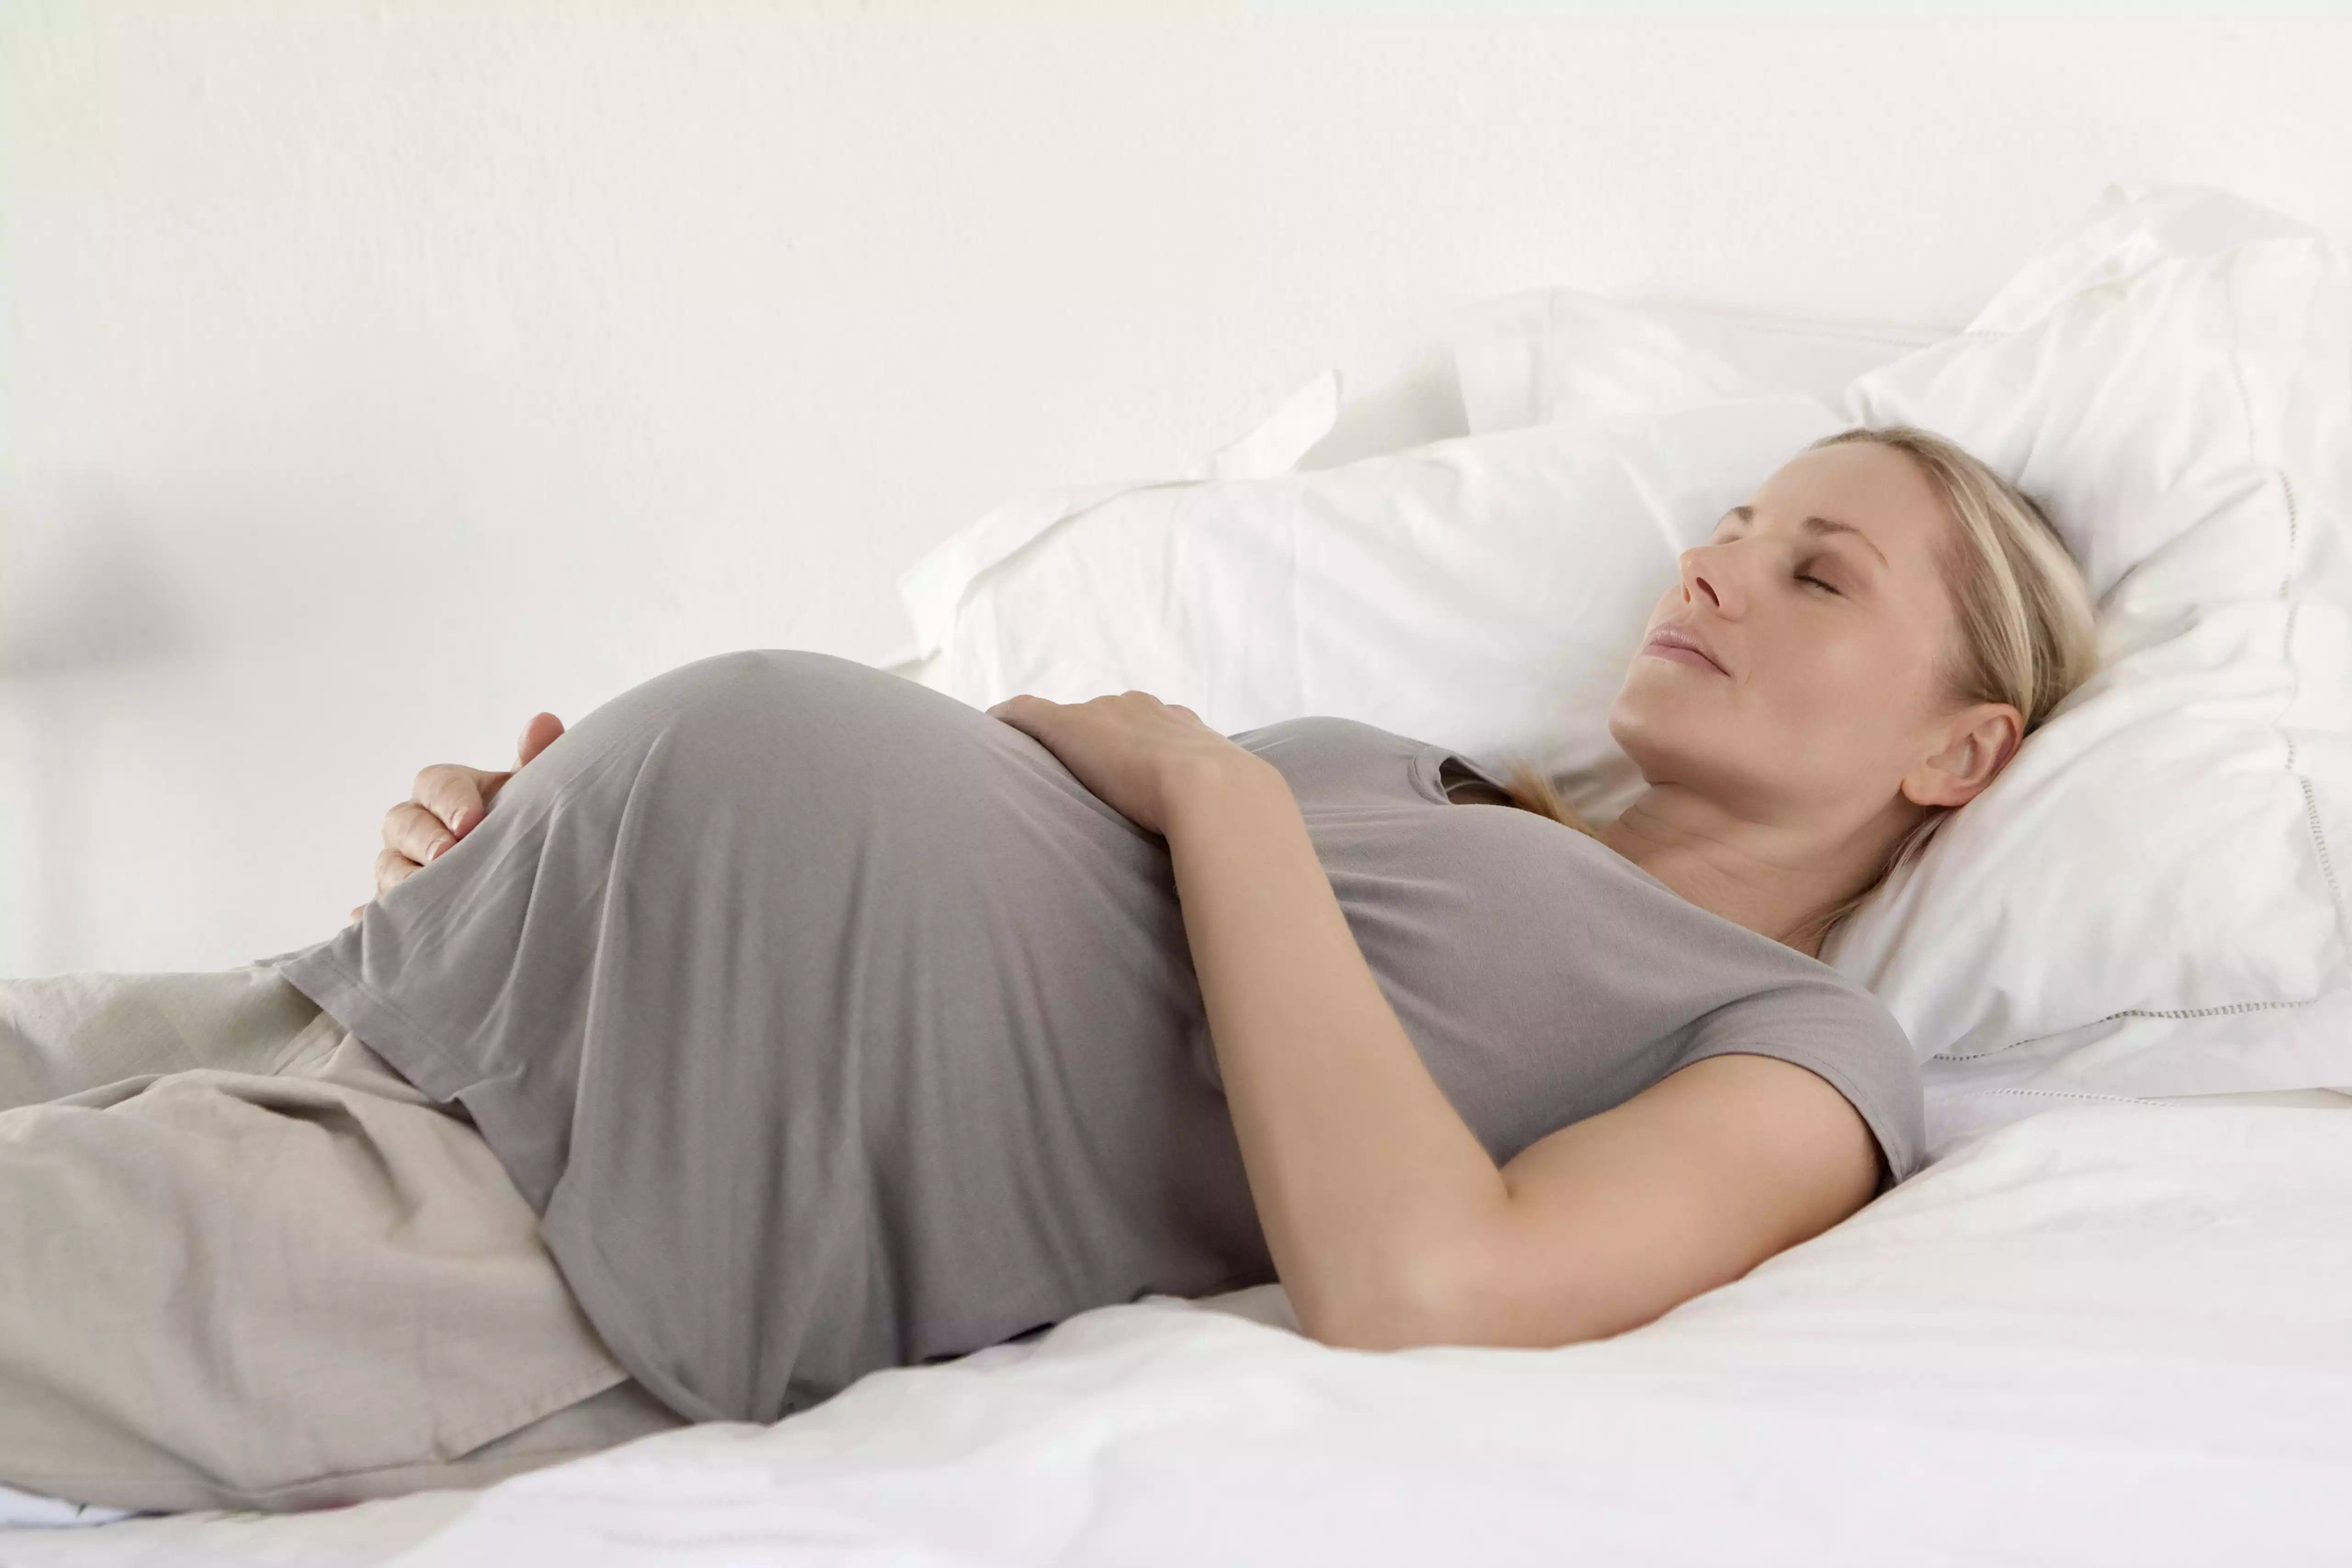 Pregnant woman asleep on her bed